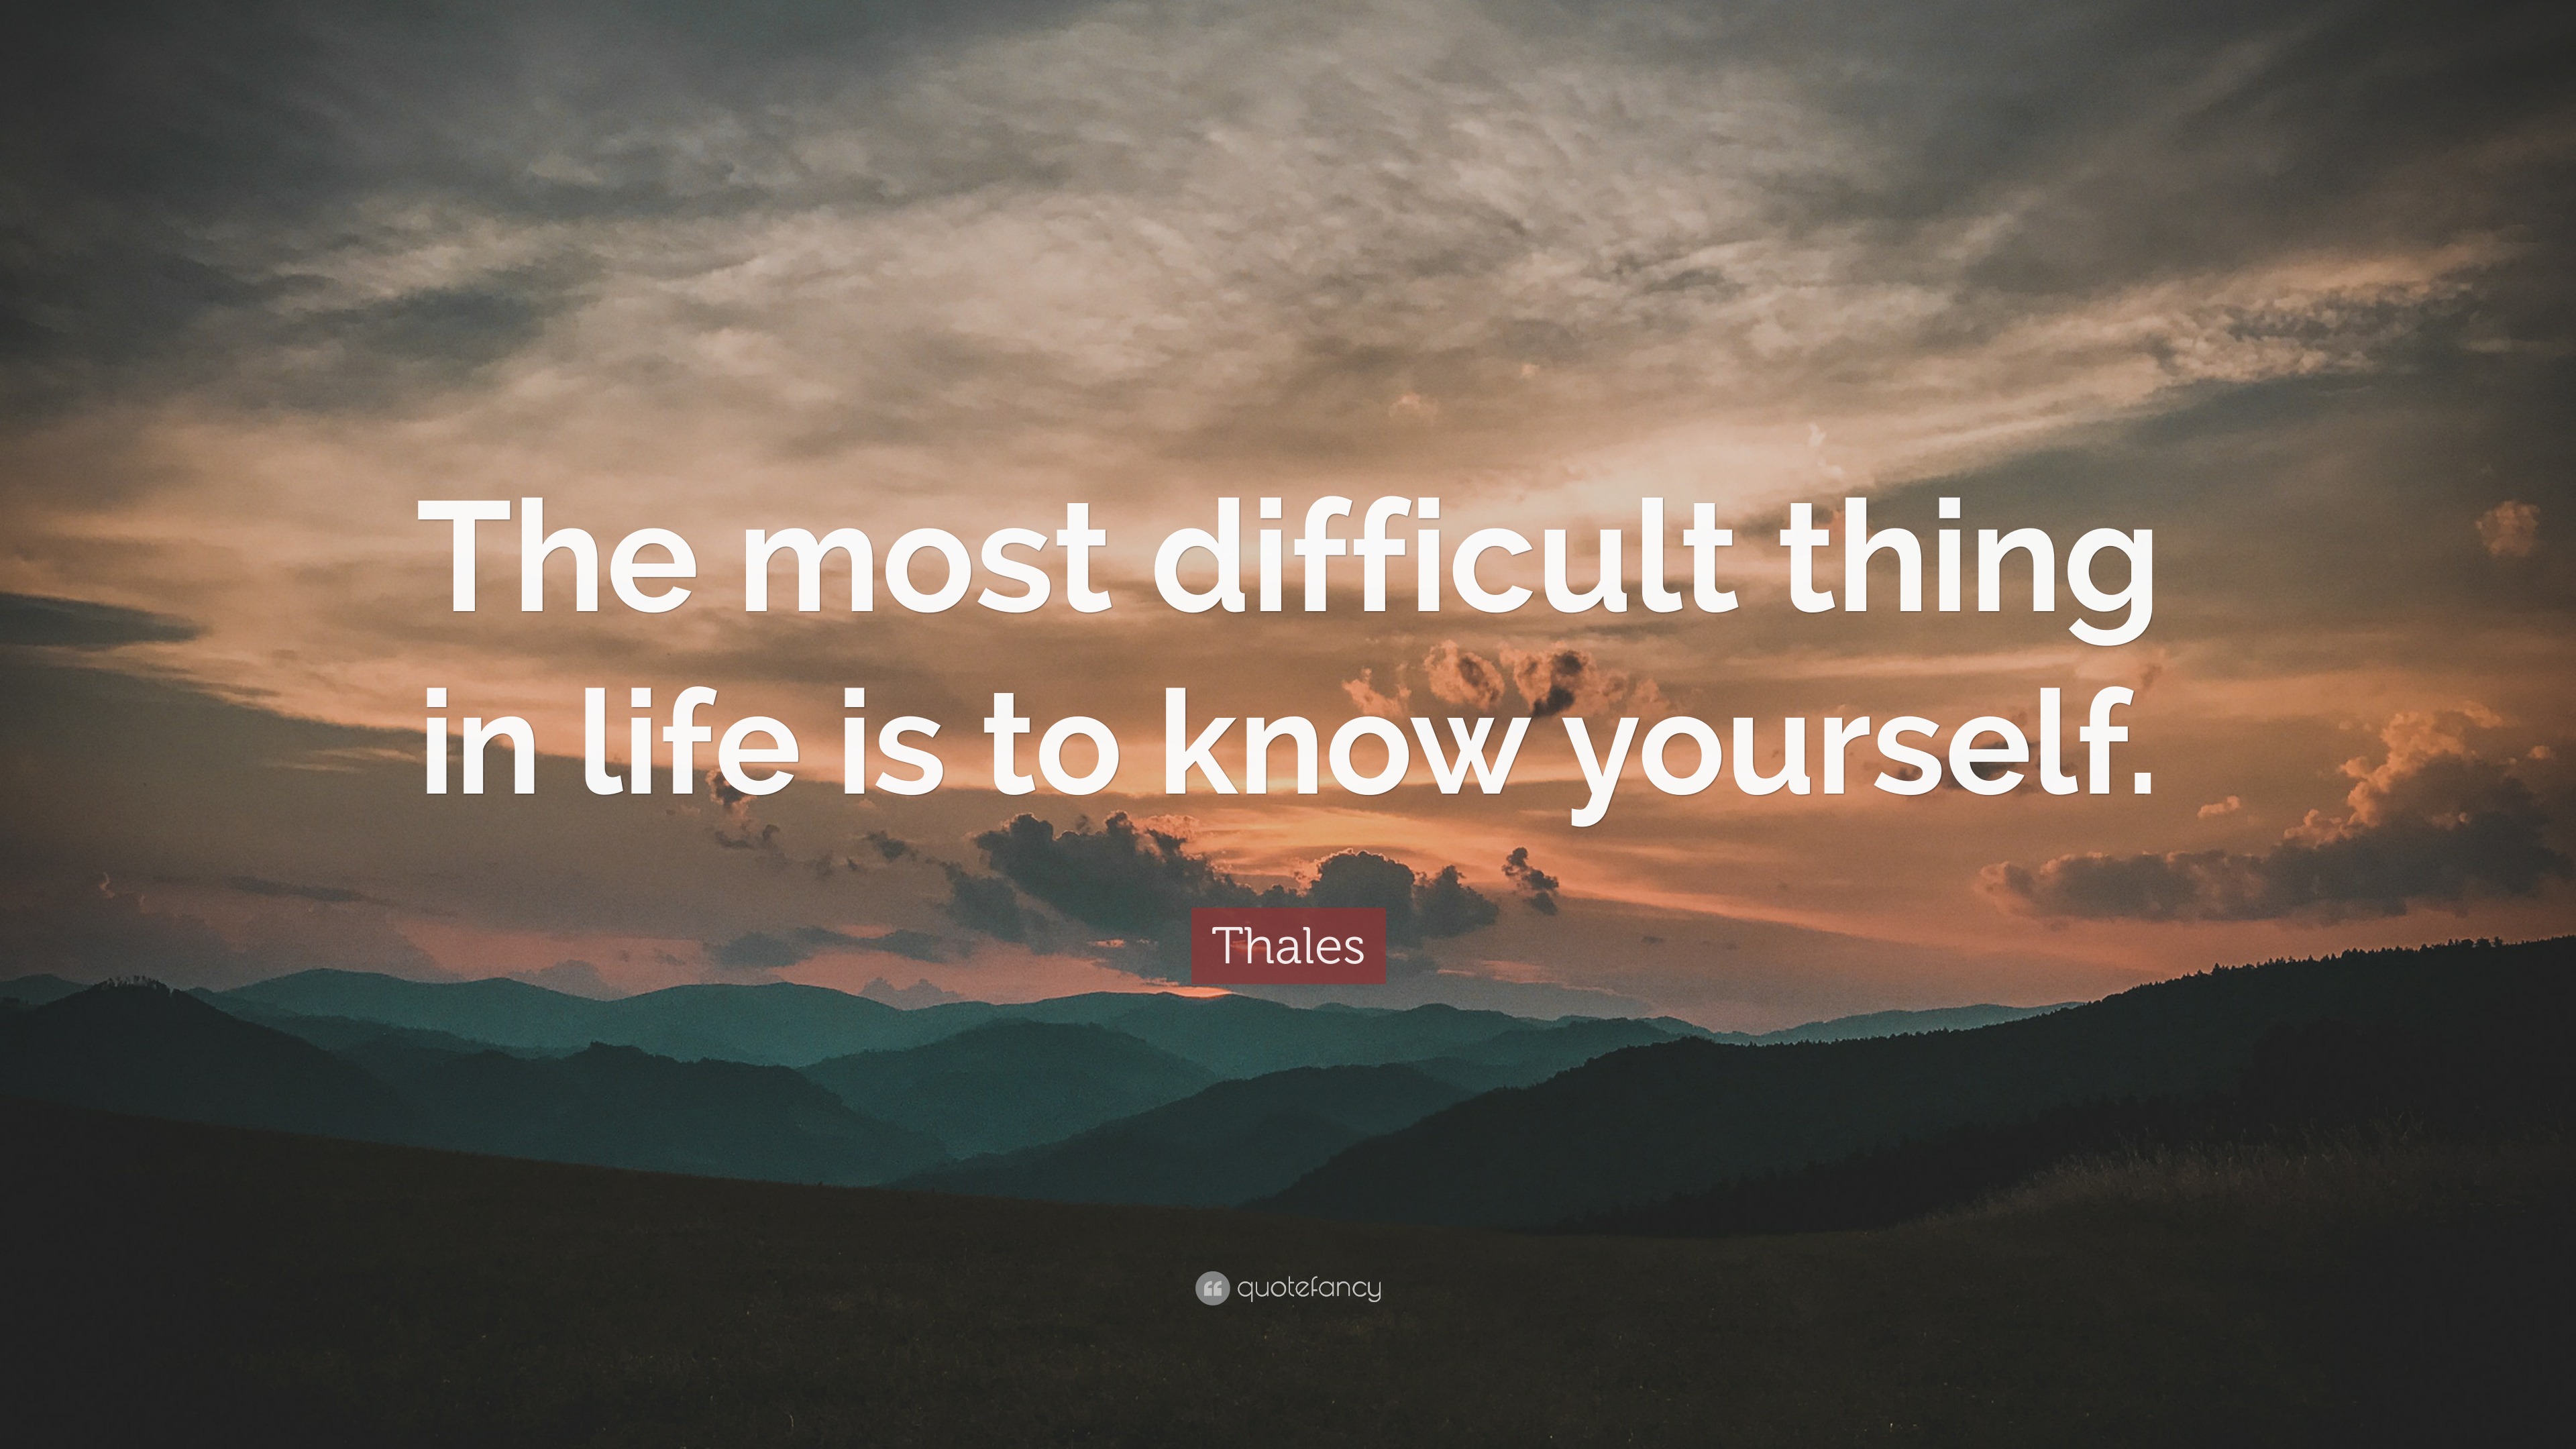 what is the most easy and difficult thing in life